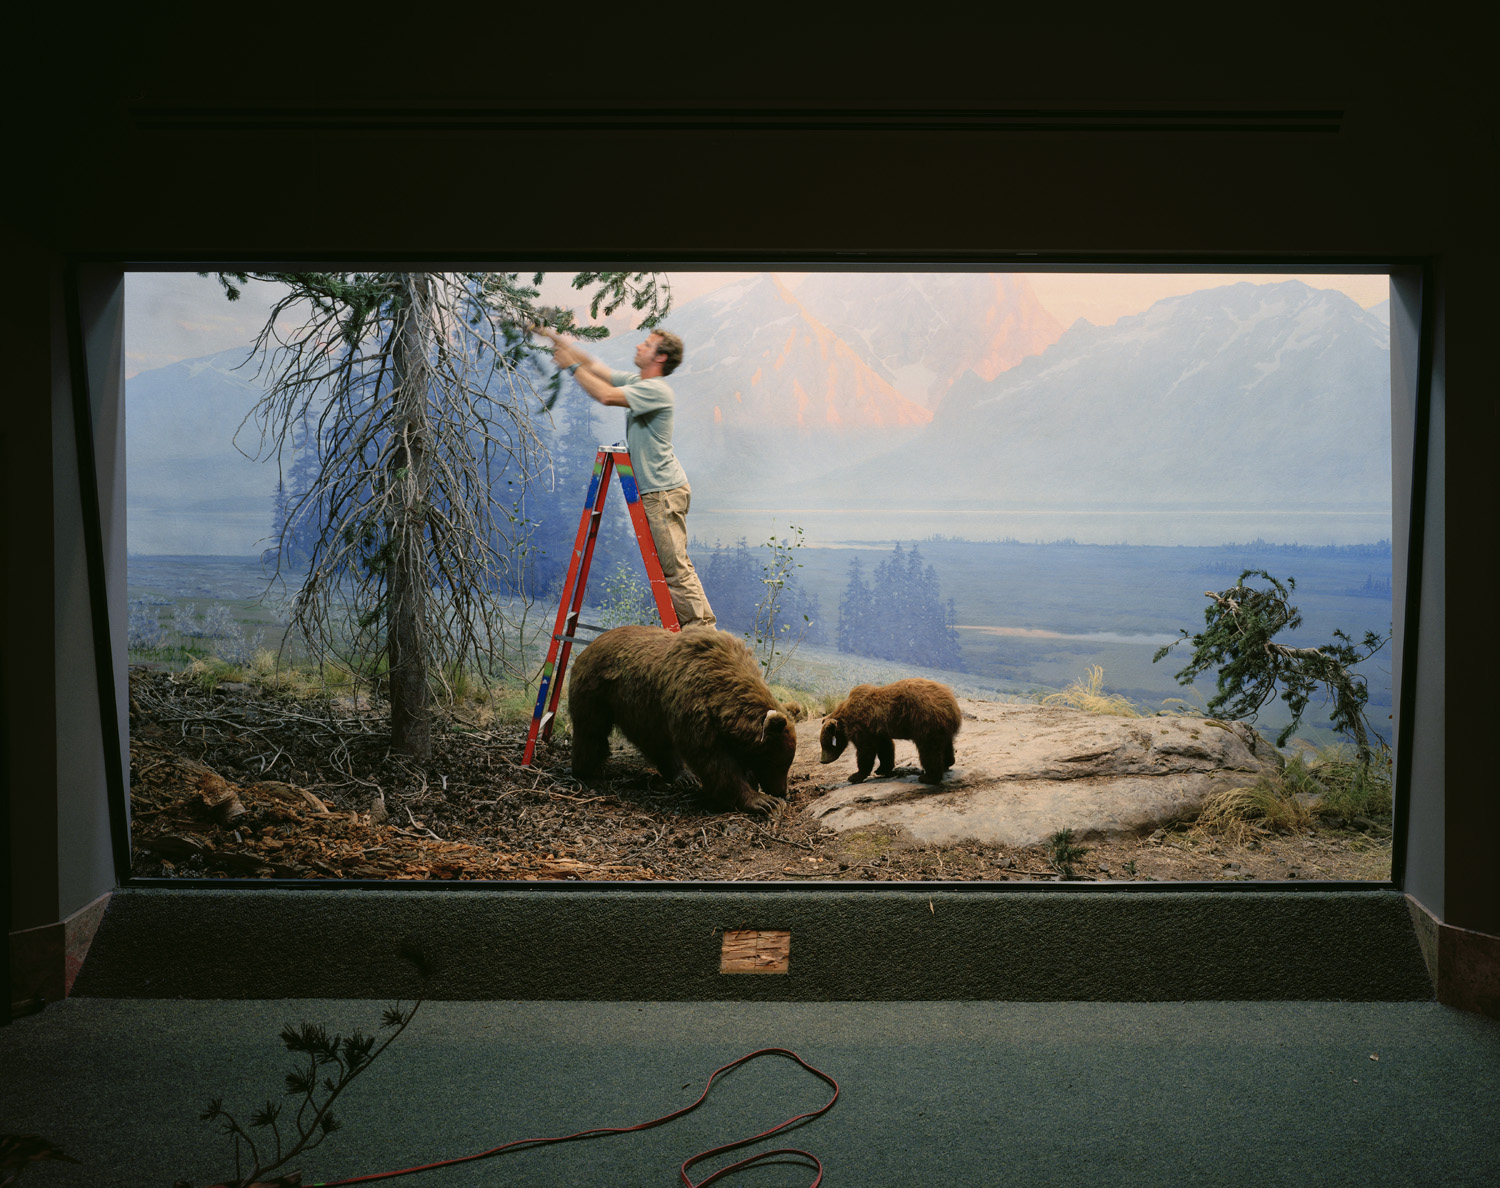  Mountain Scene With Man and Bears, 2005 